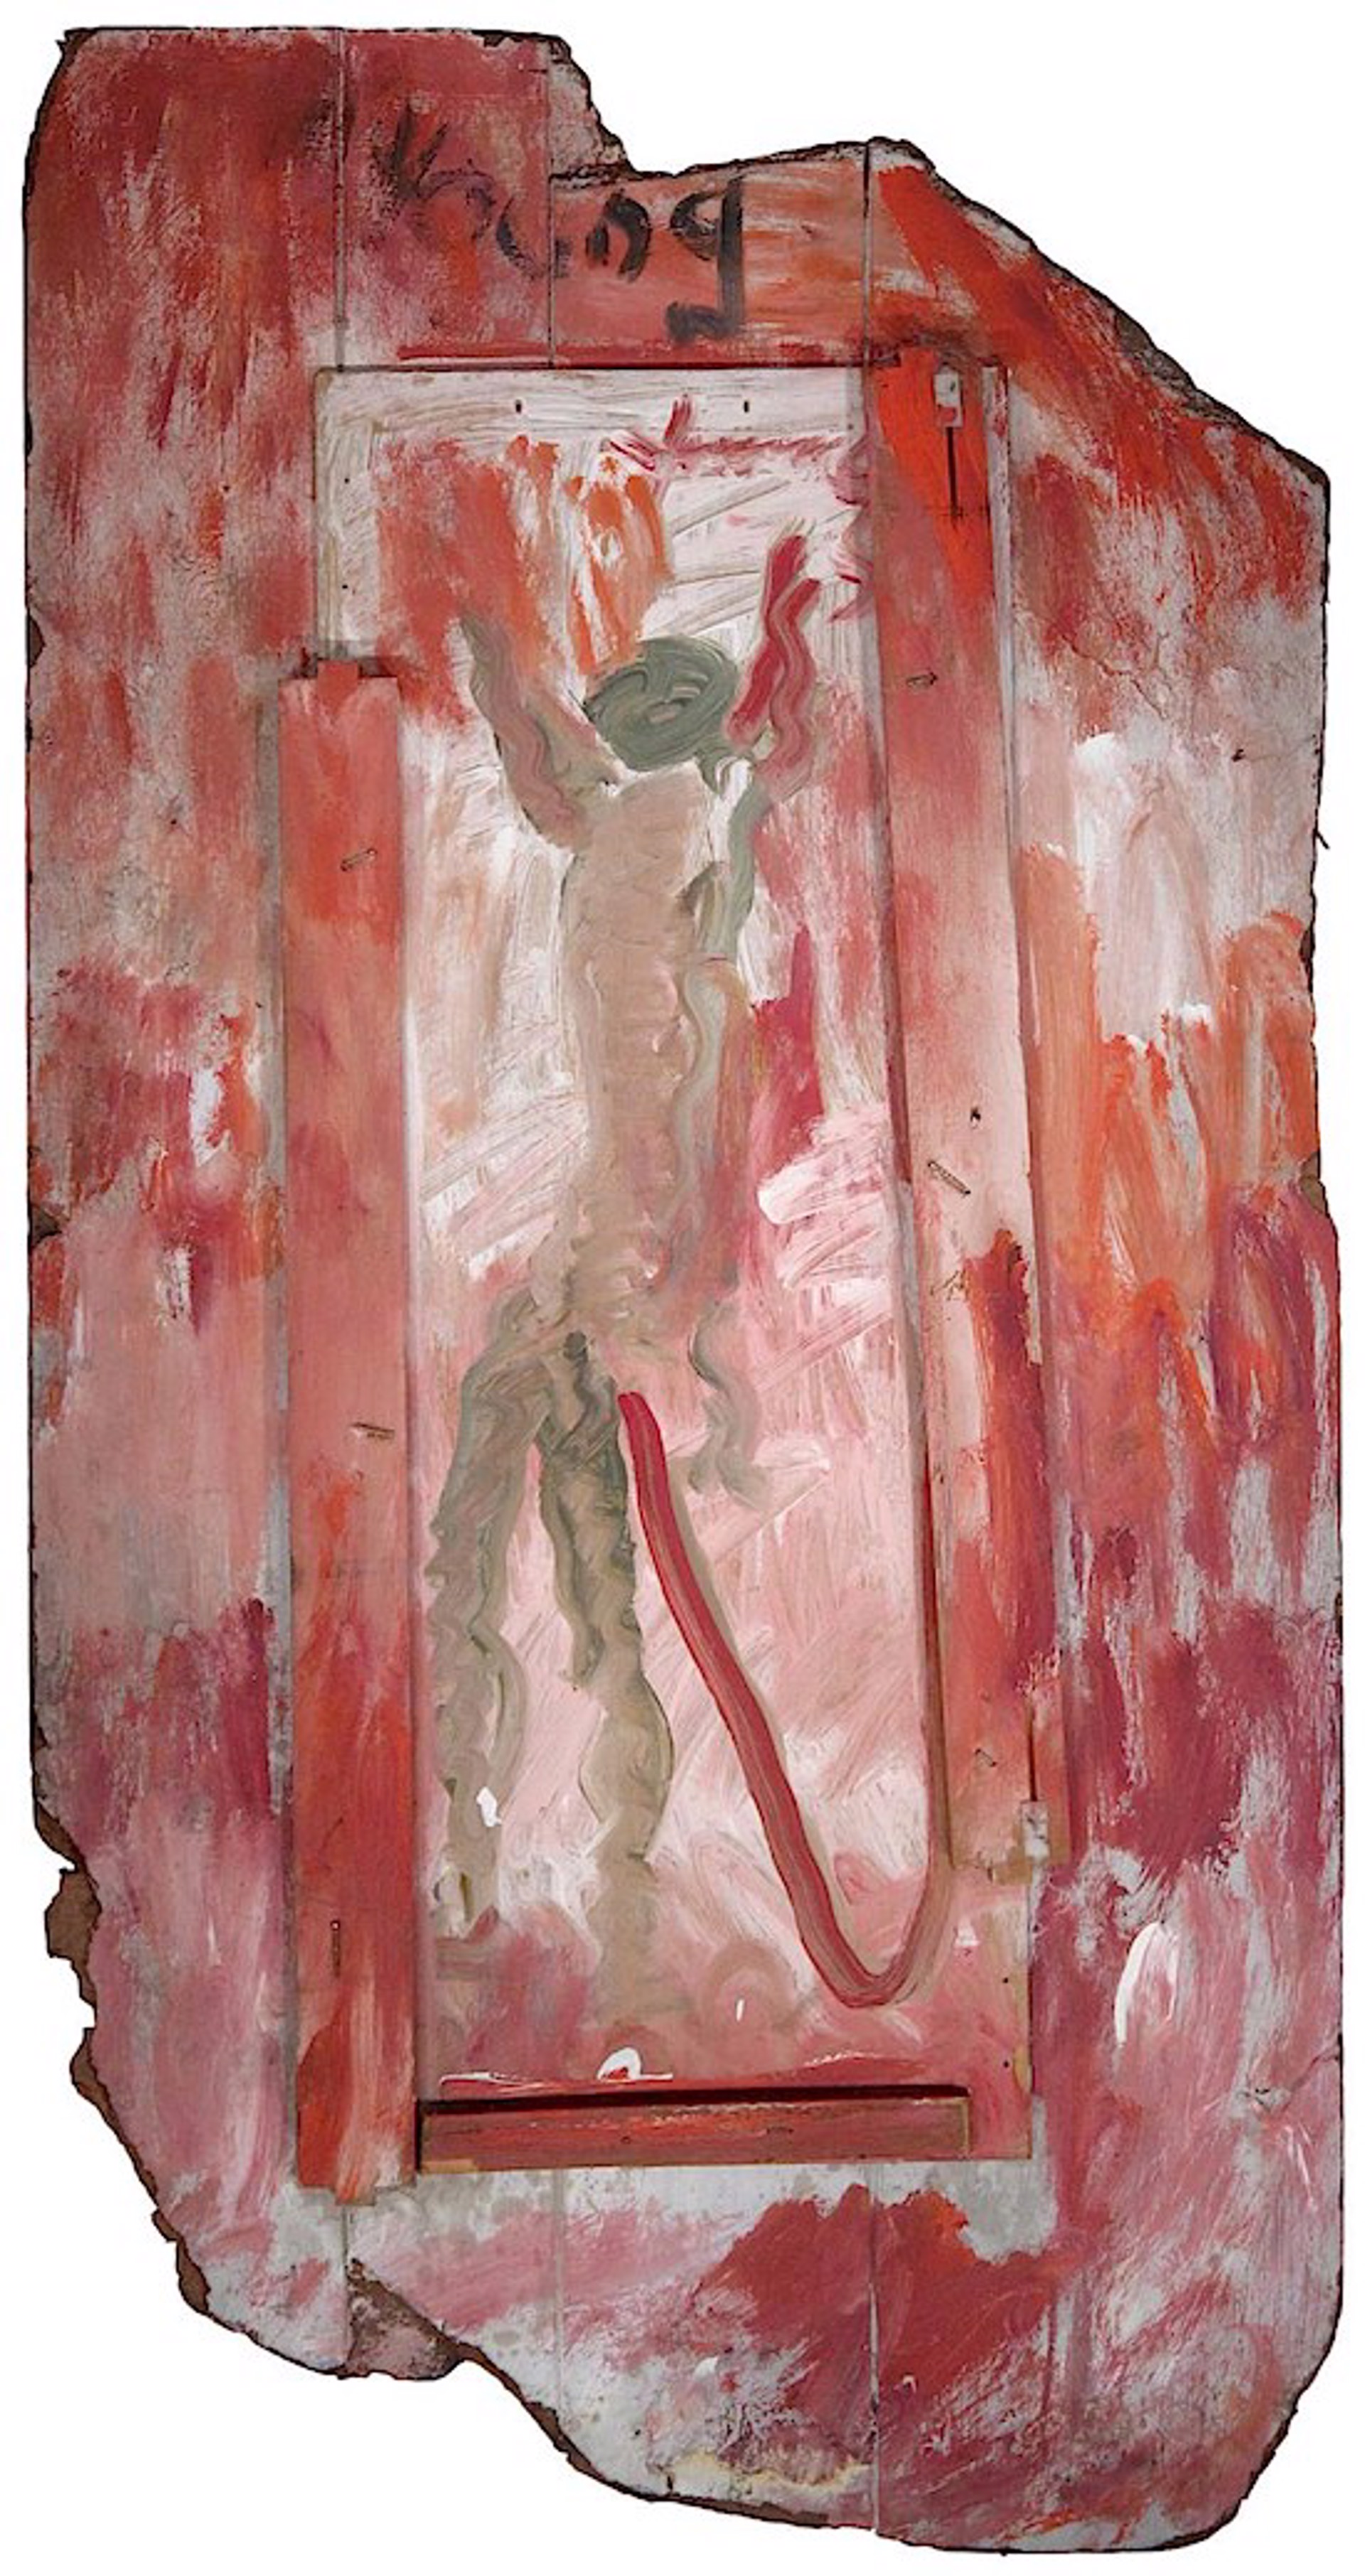 Untitled (Red Erotic Fallen Angel) by Purvis Young